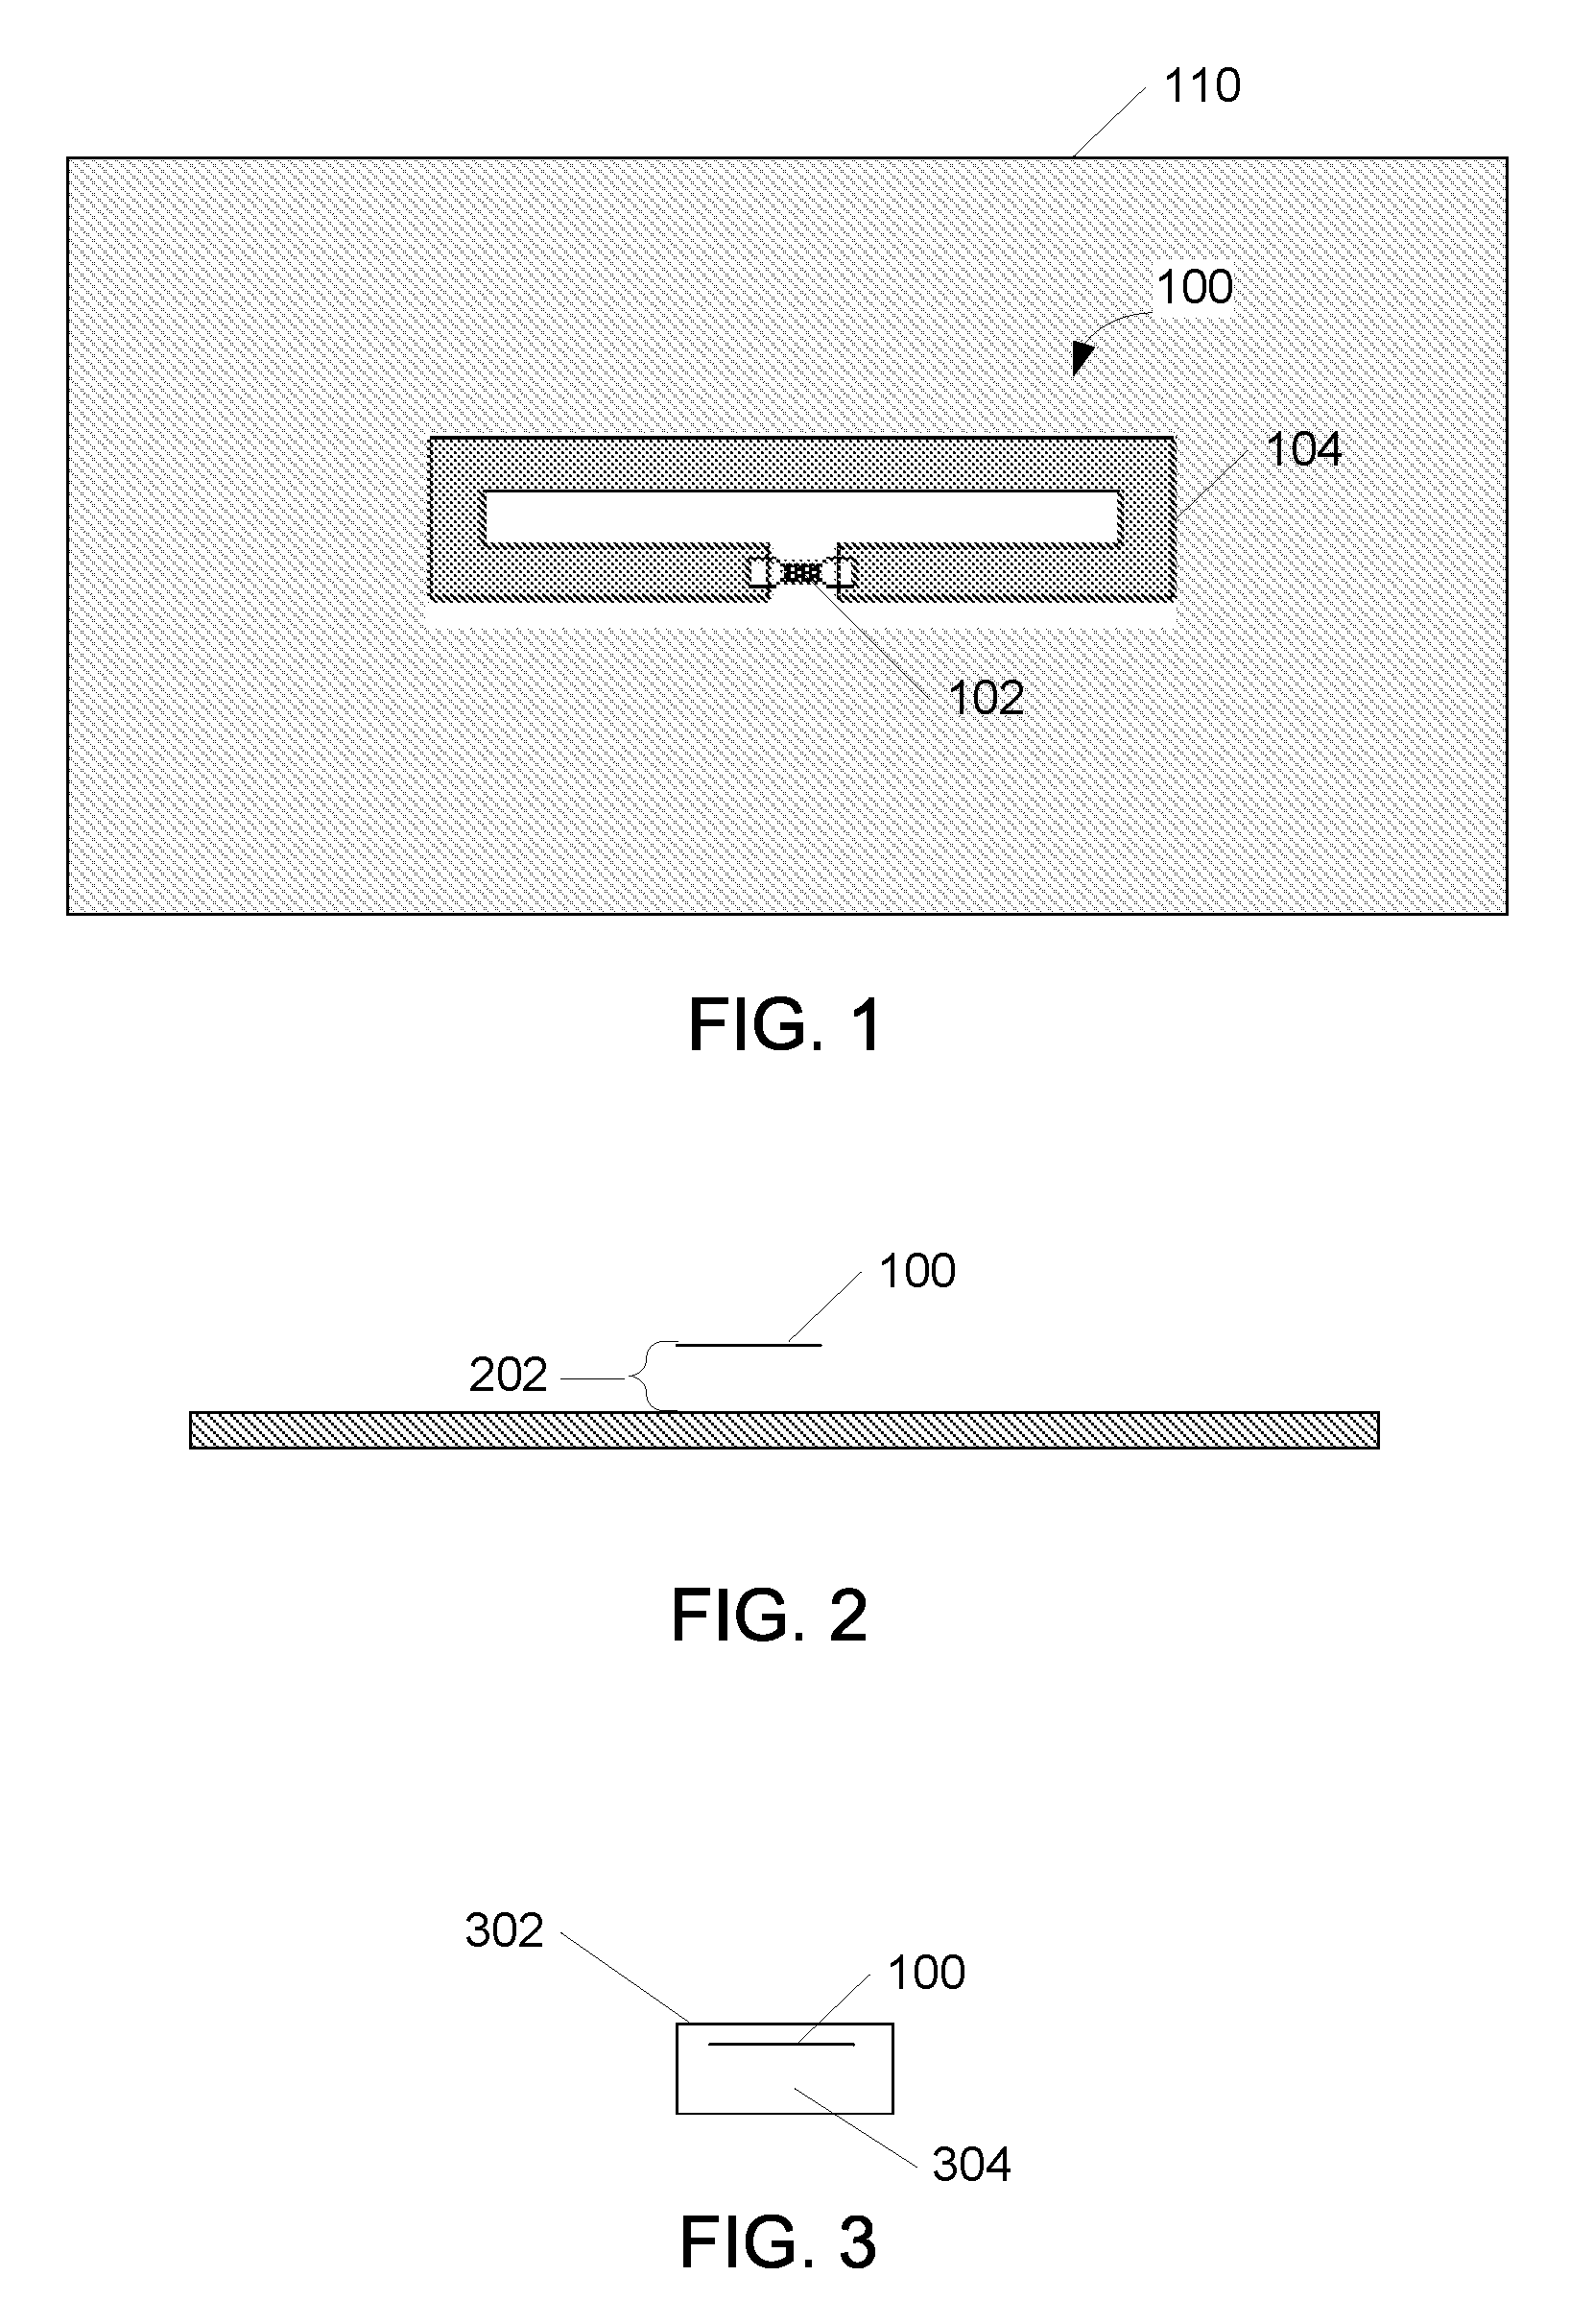 Systems and methods for a RFID enabled metal license plate